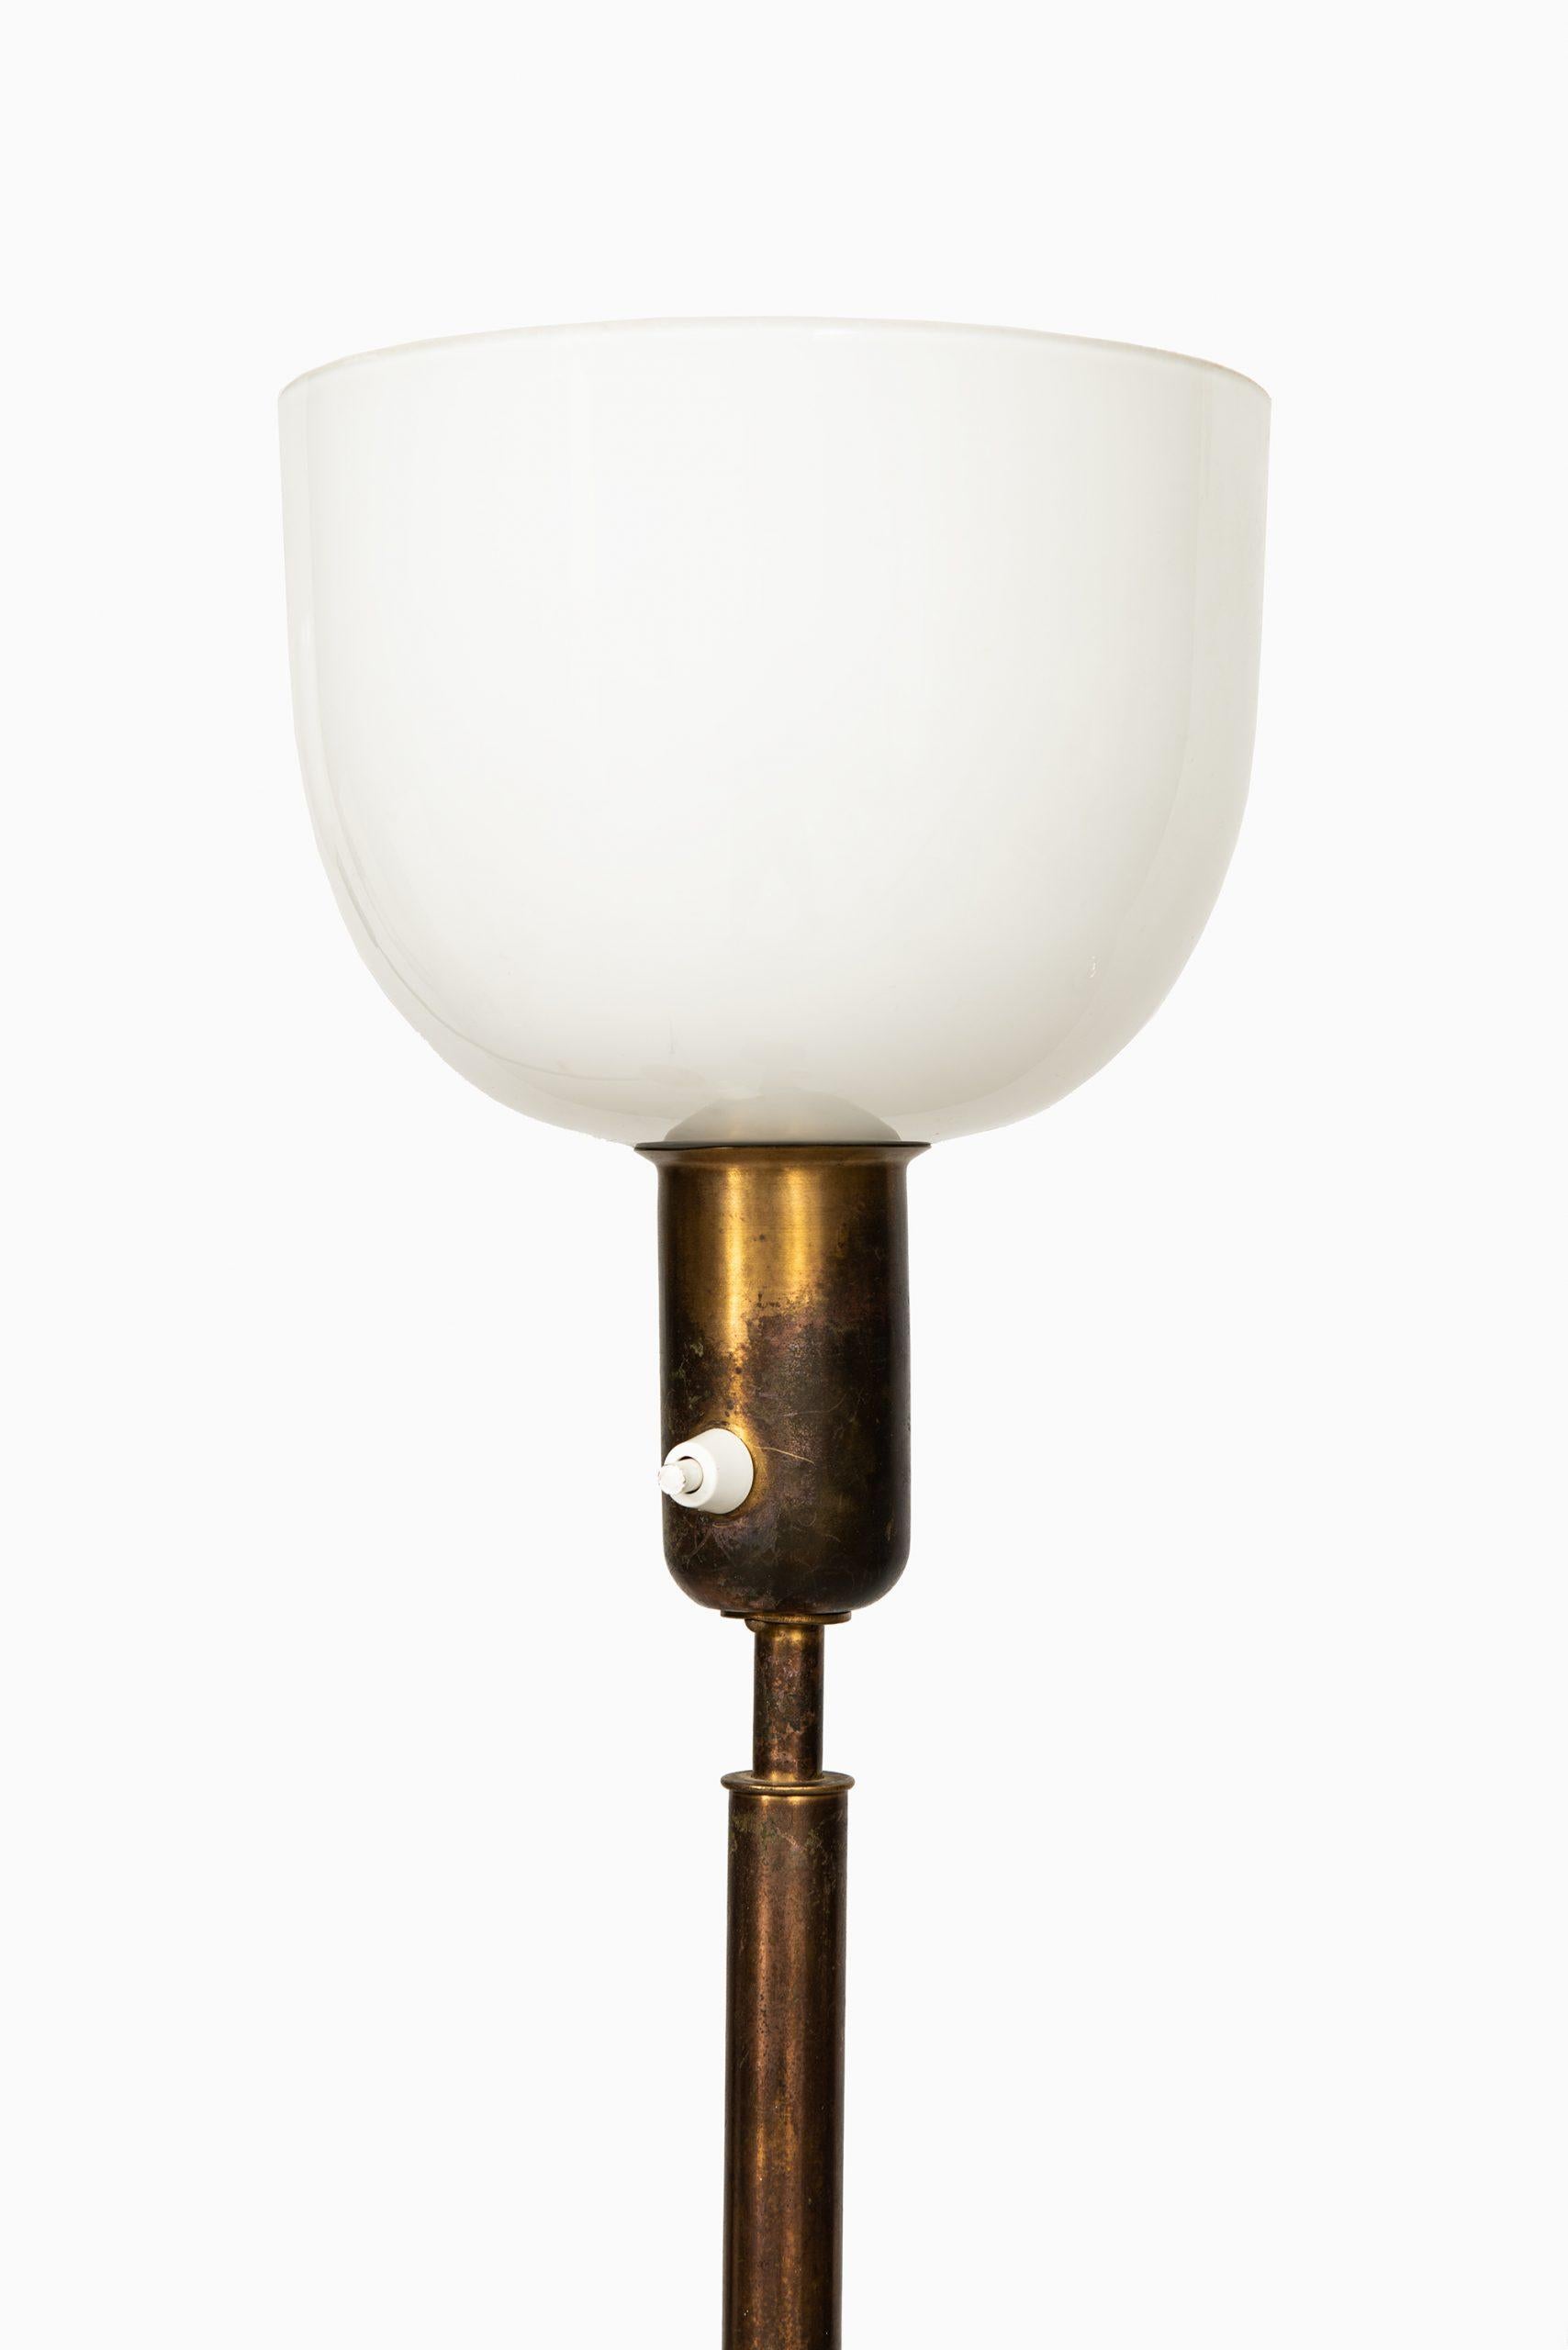 Swedish Floor Lamps Attributed to Hans Bergström Produced by ASEA in Sweden